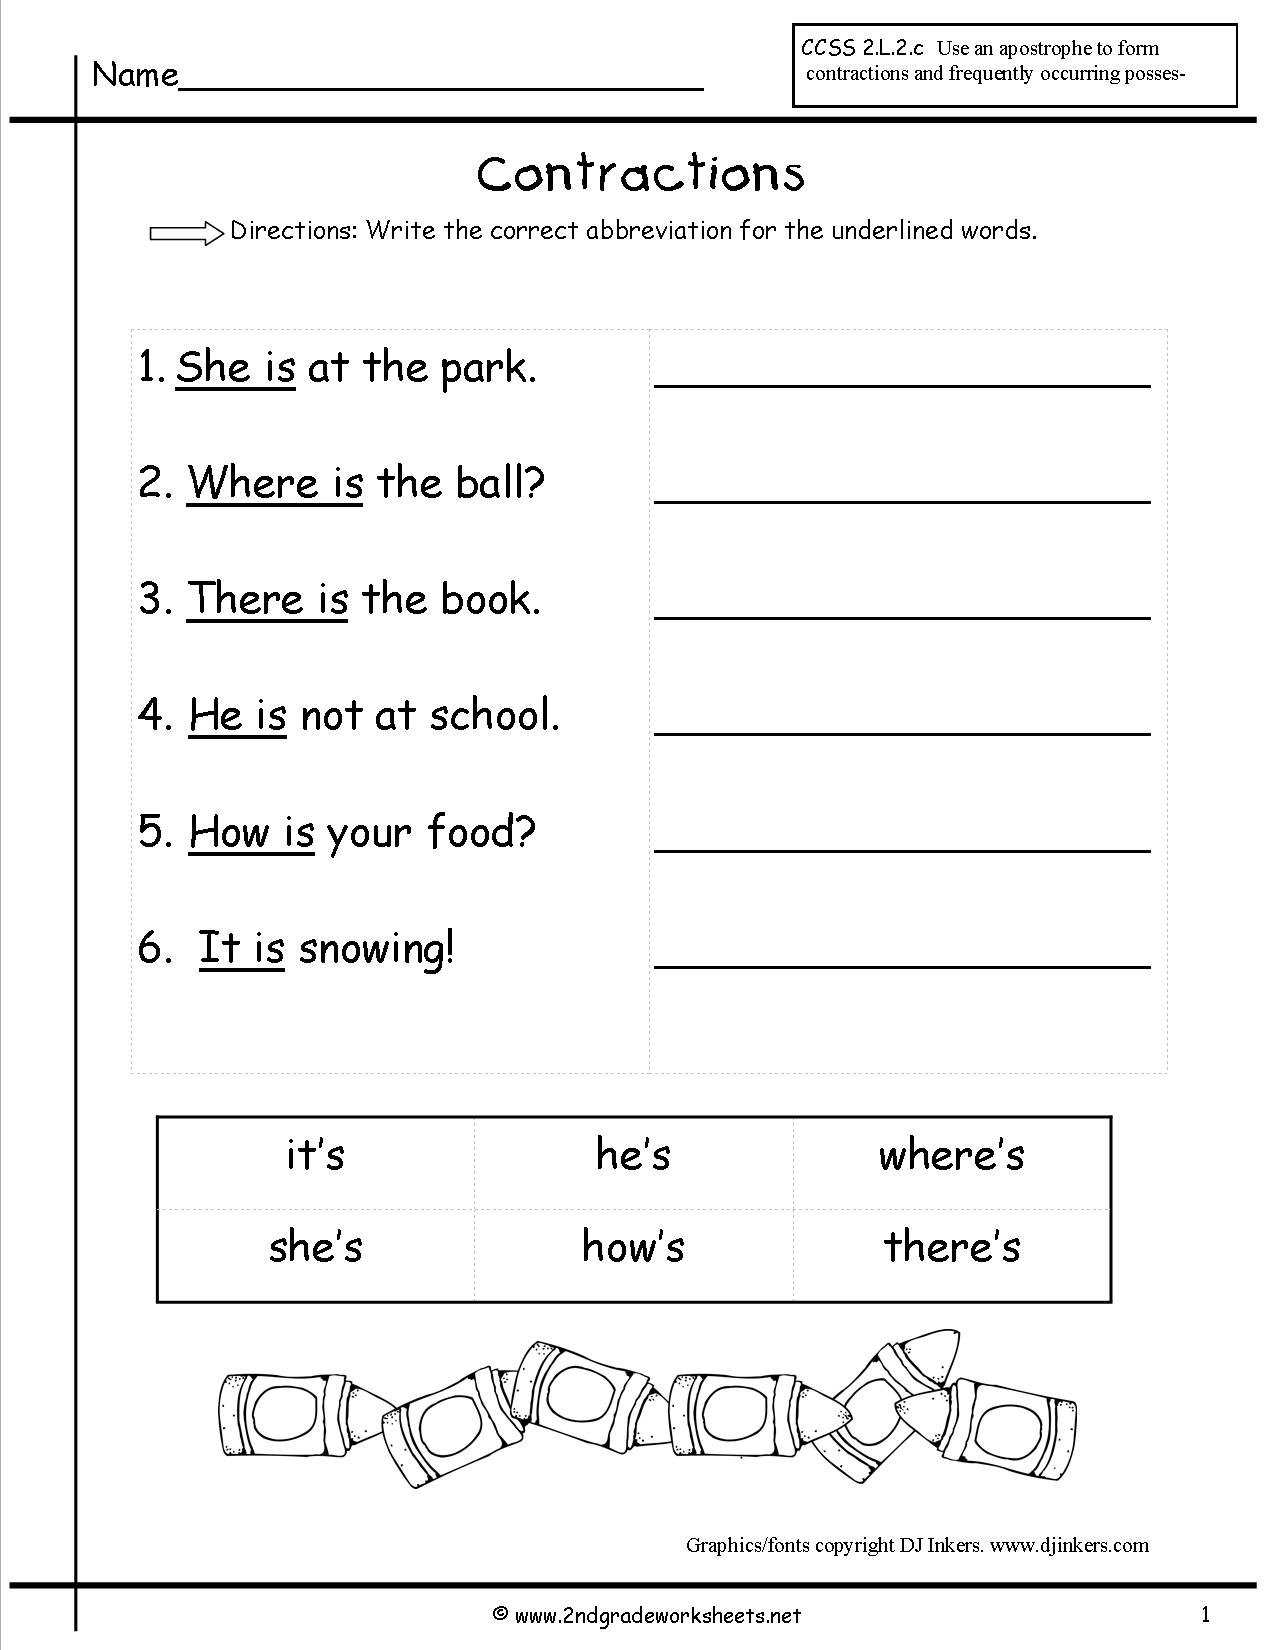 Free Contractions Worksheets And Printouts As Well As Contractions Worksheet Pdf